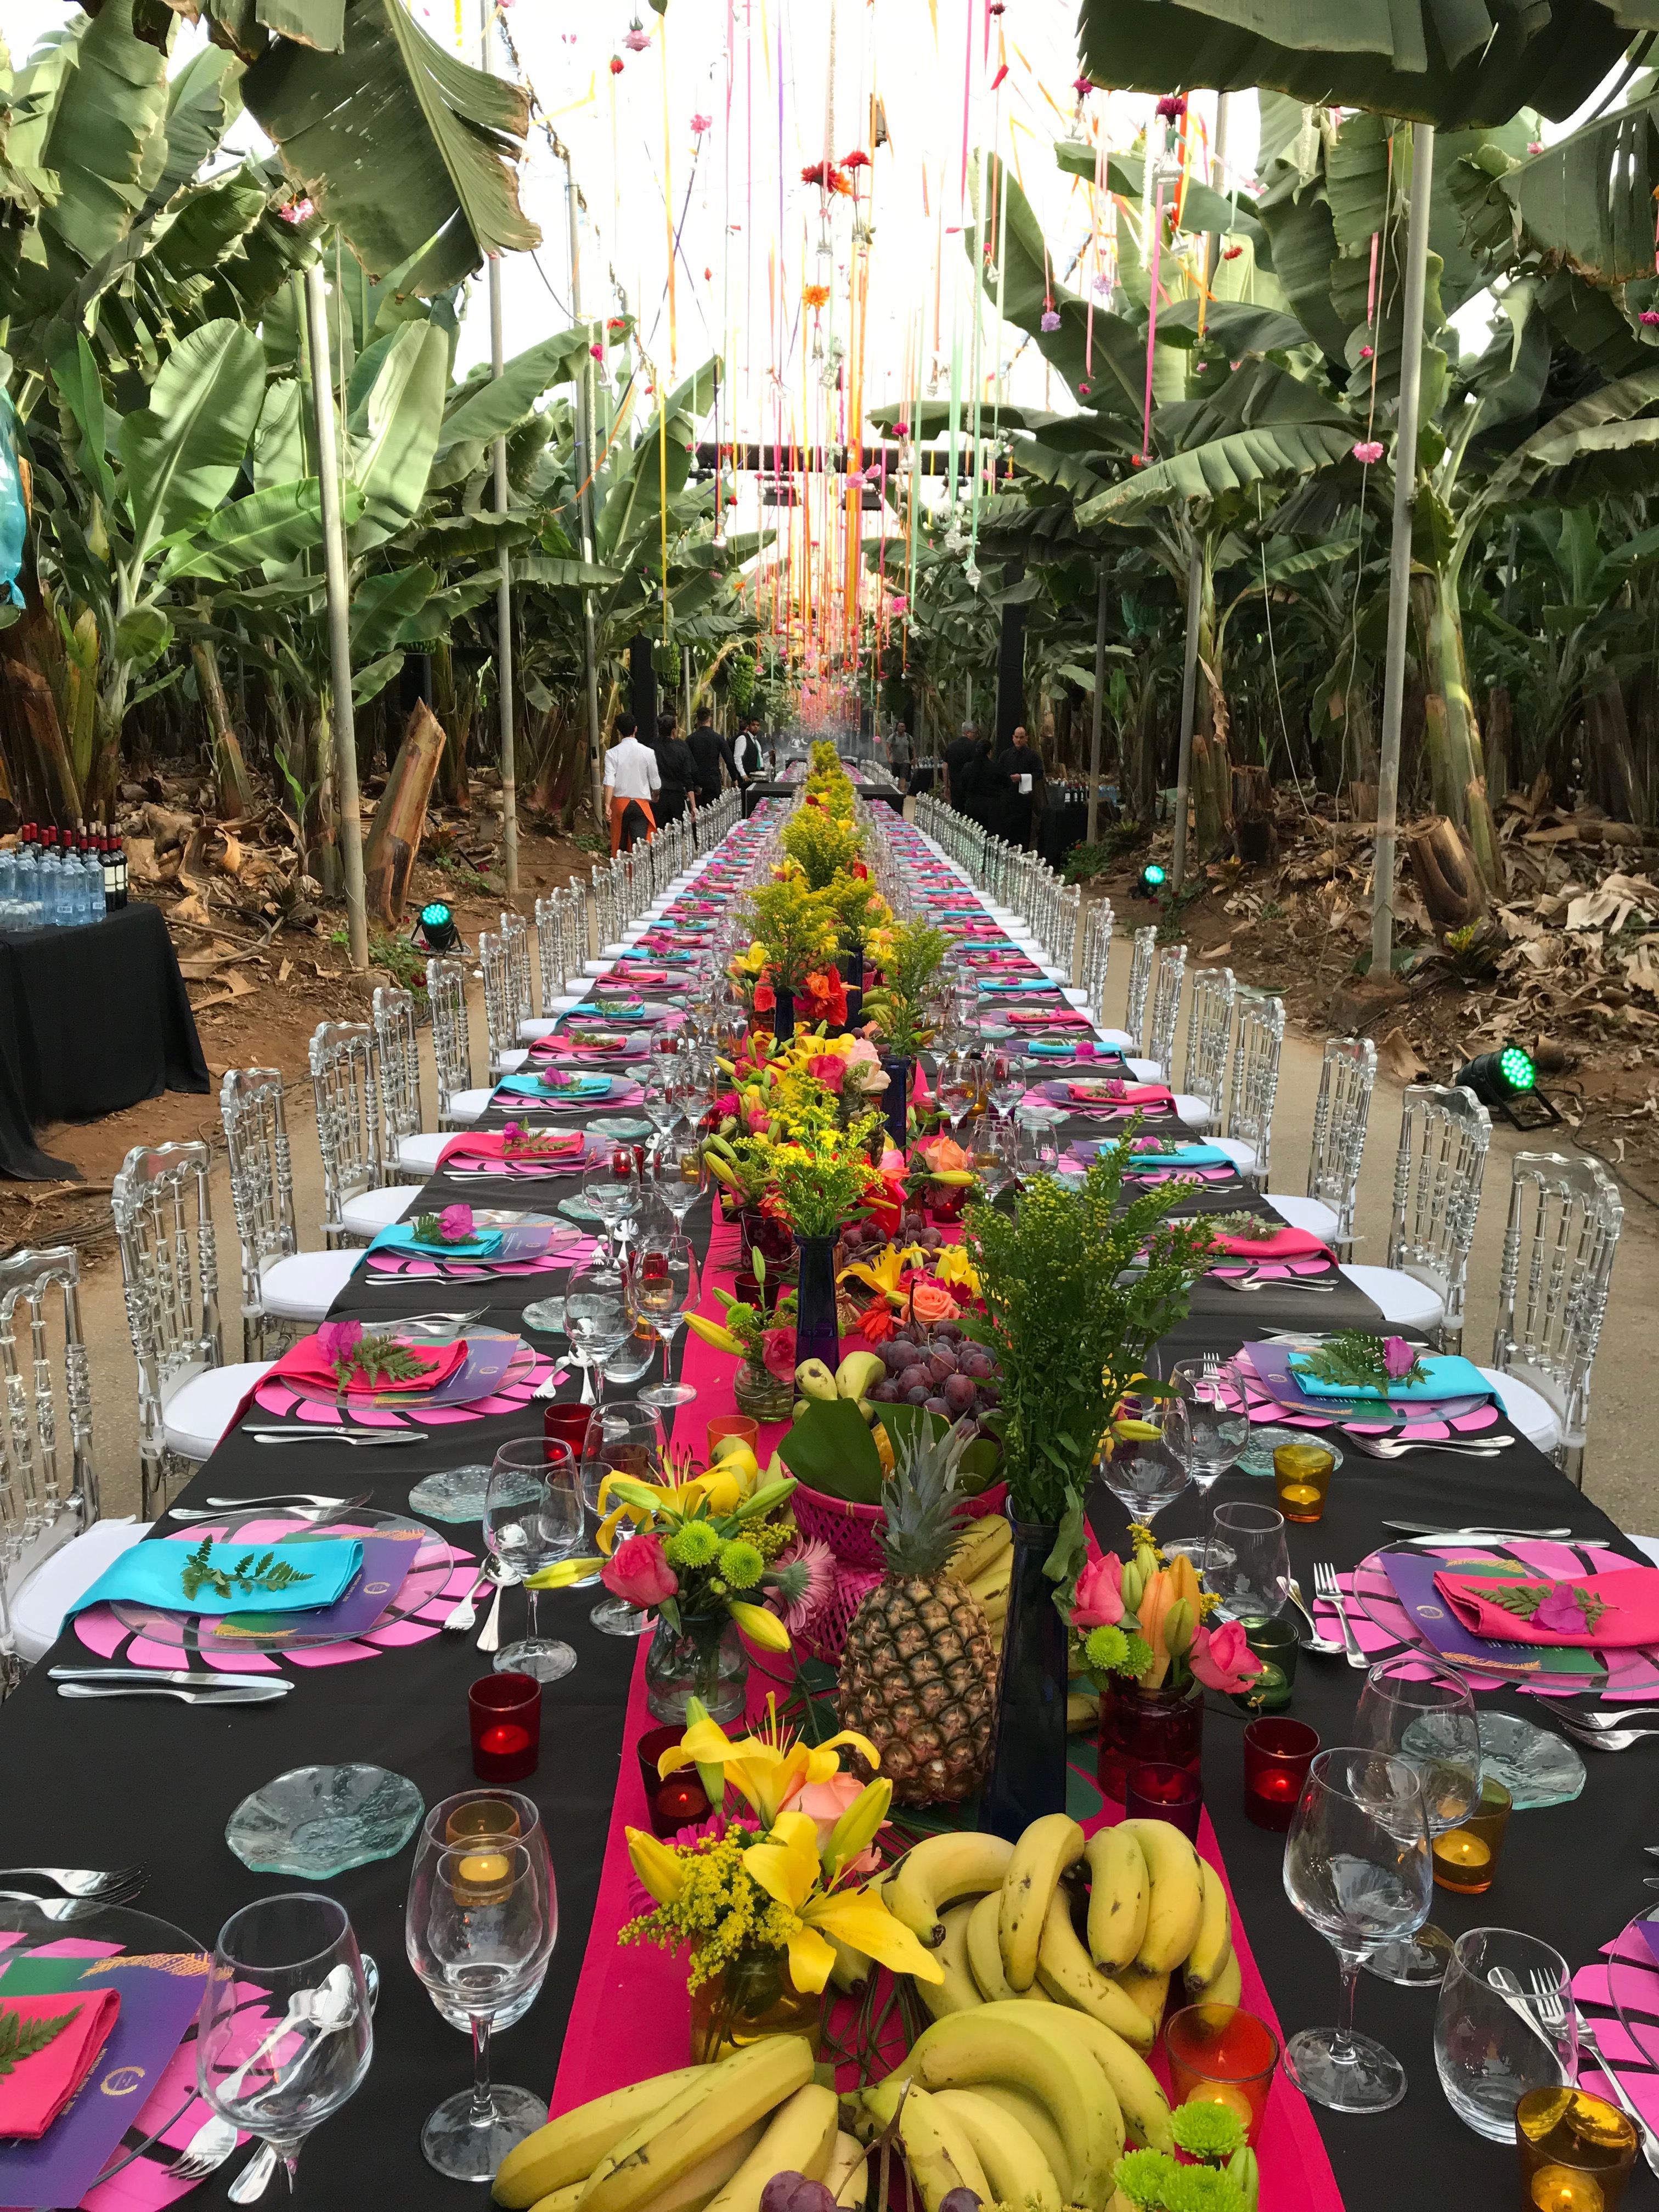 The preparation of a gala dinner at imperial table